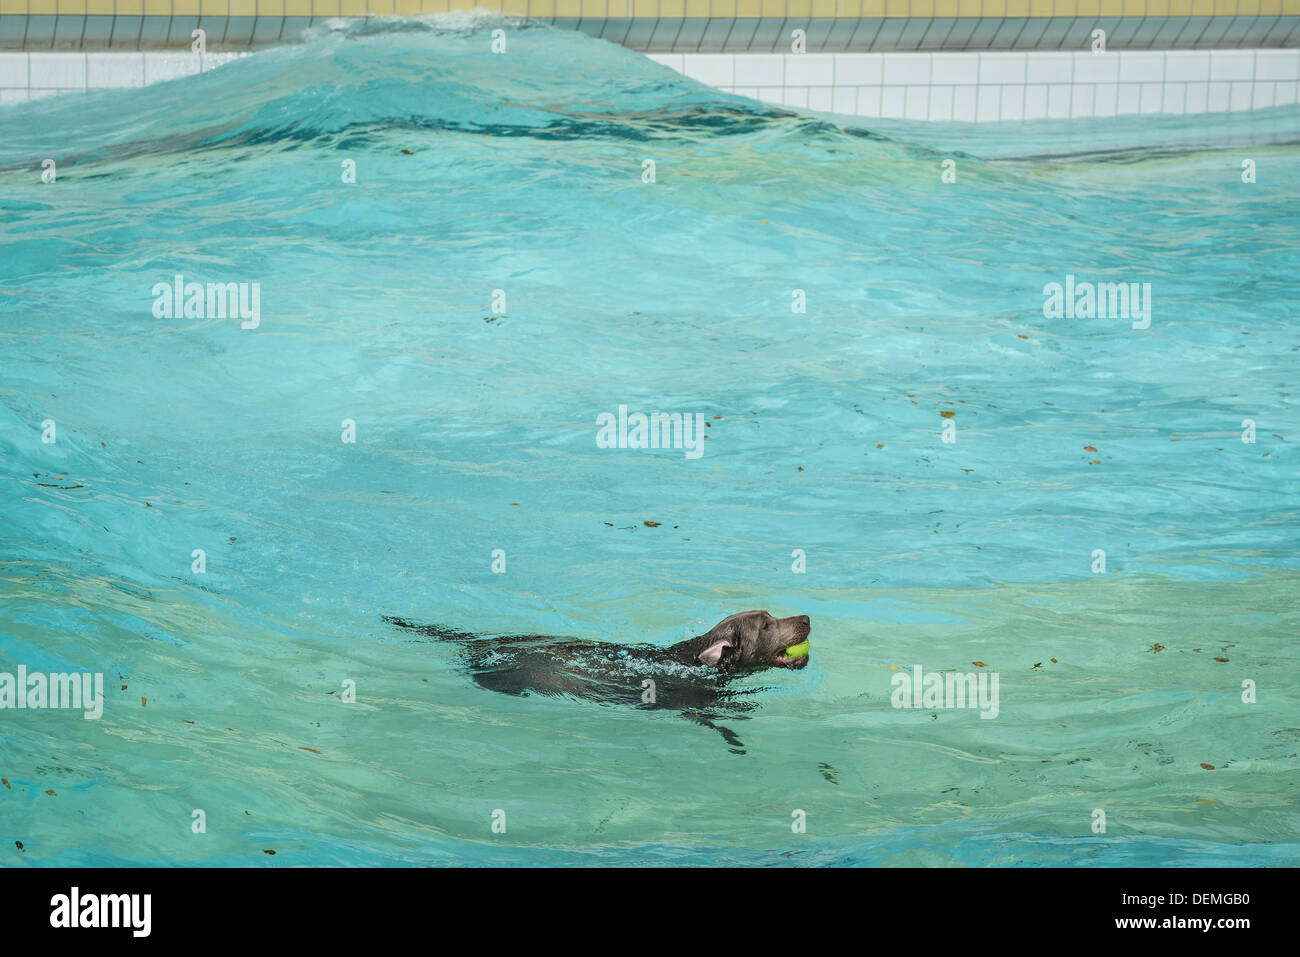 Bamberg, Germany. 21st Sep, 2013. A dog swims in a pool during the Dog Bathing Day at Stadionbad pool in Bamberg, Germany, 21 September 2013. Municipal works opened their pools exclusively for dogs at the end of the outdoor swimming pool season. Photo: DAVID EBENER/dpa/Alamy Live News Stock Photo